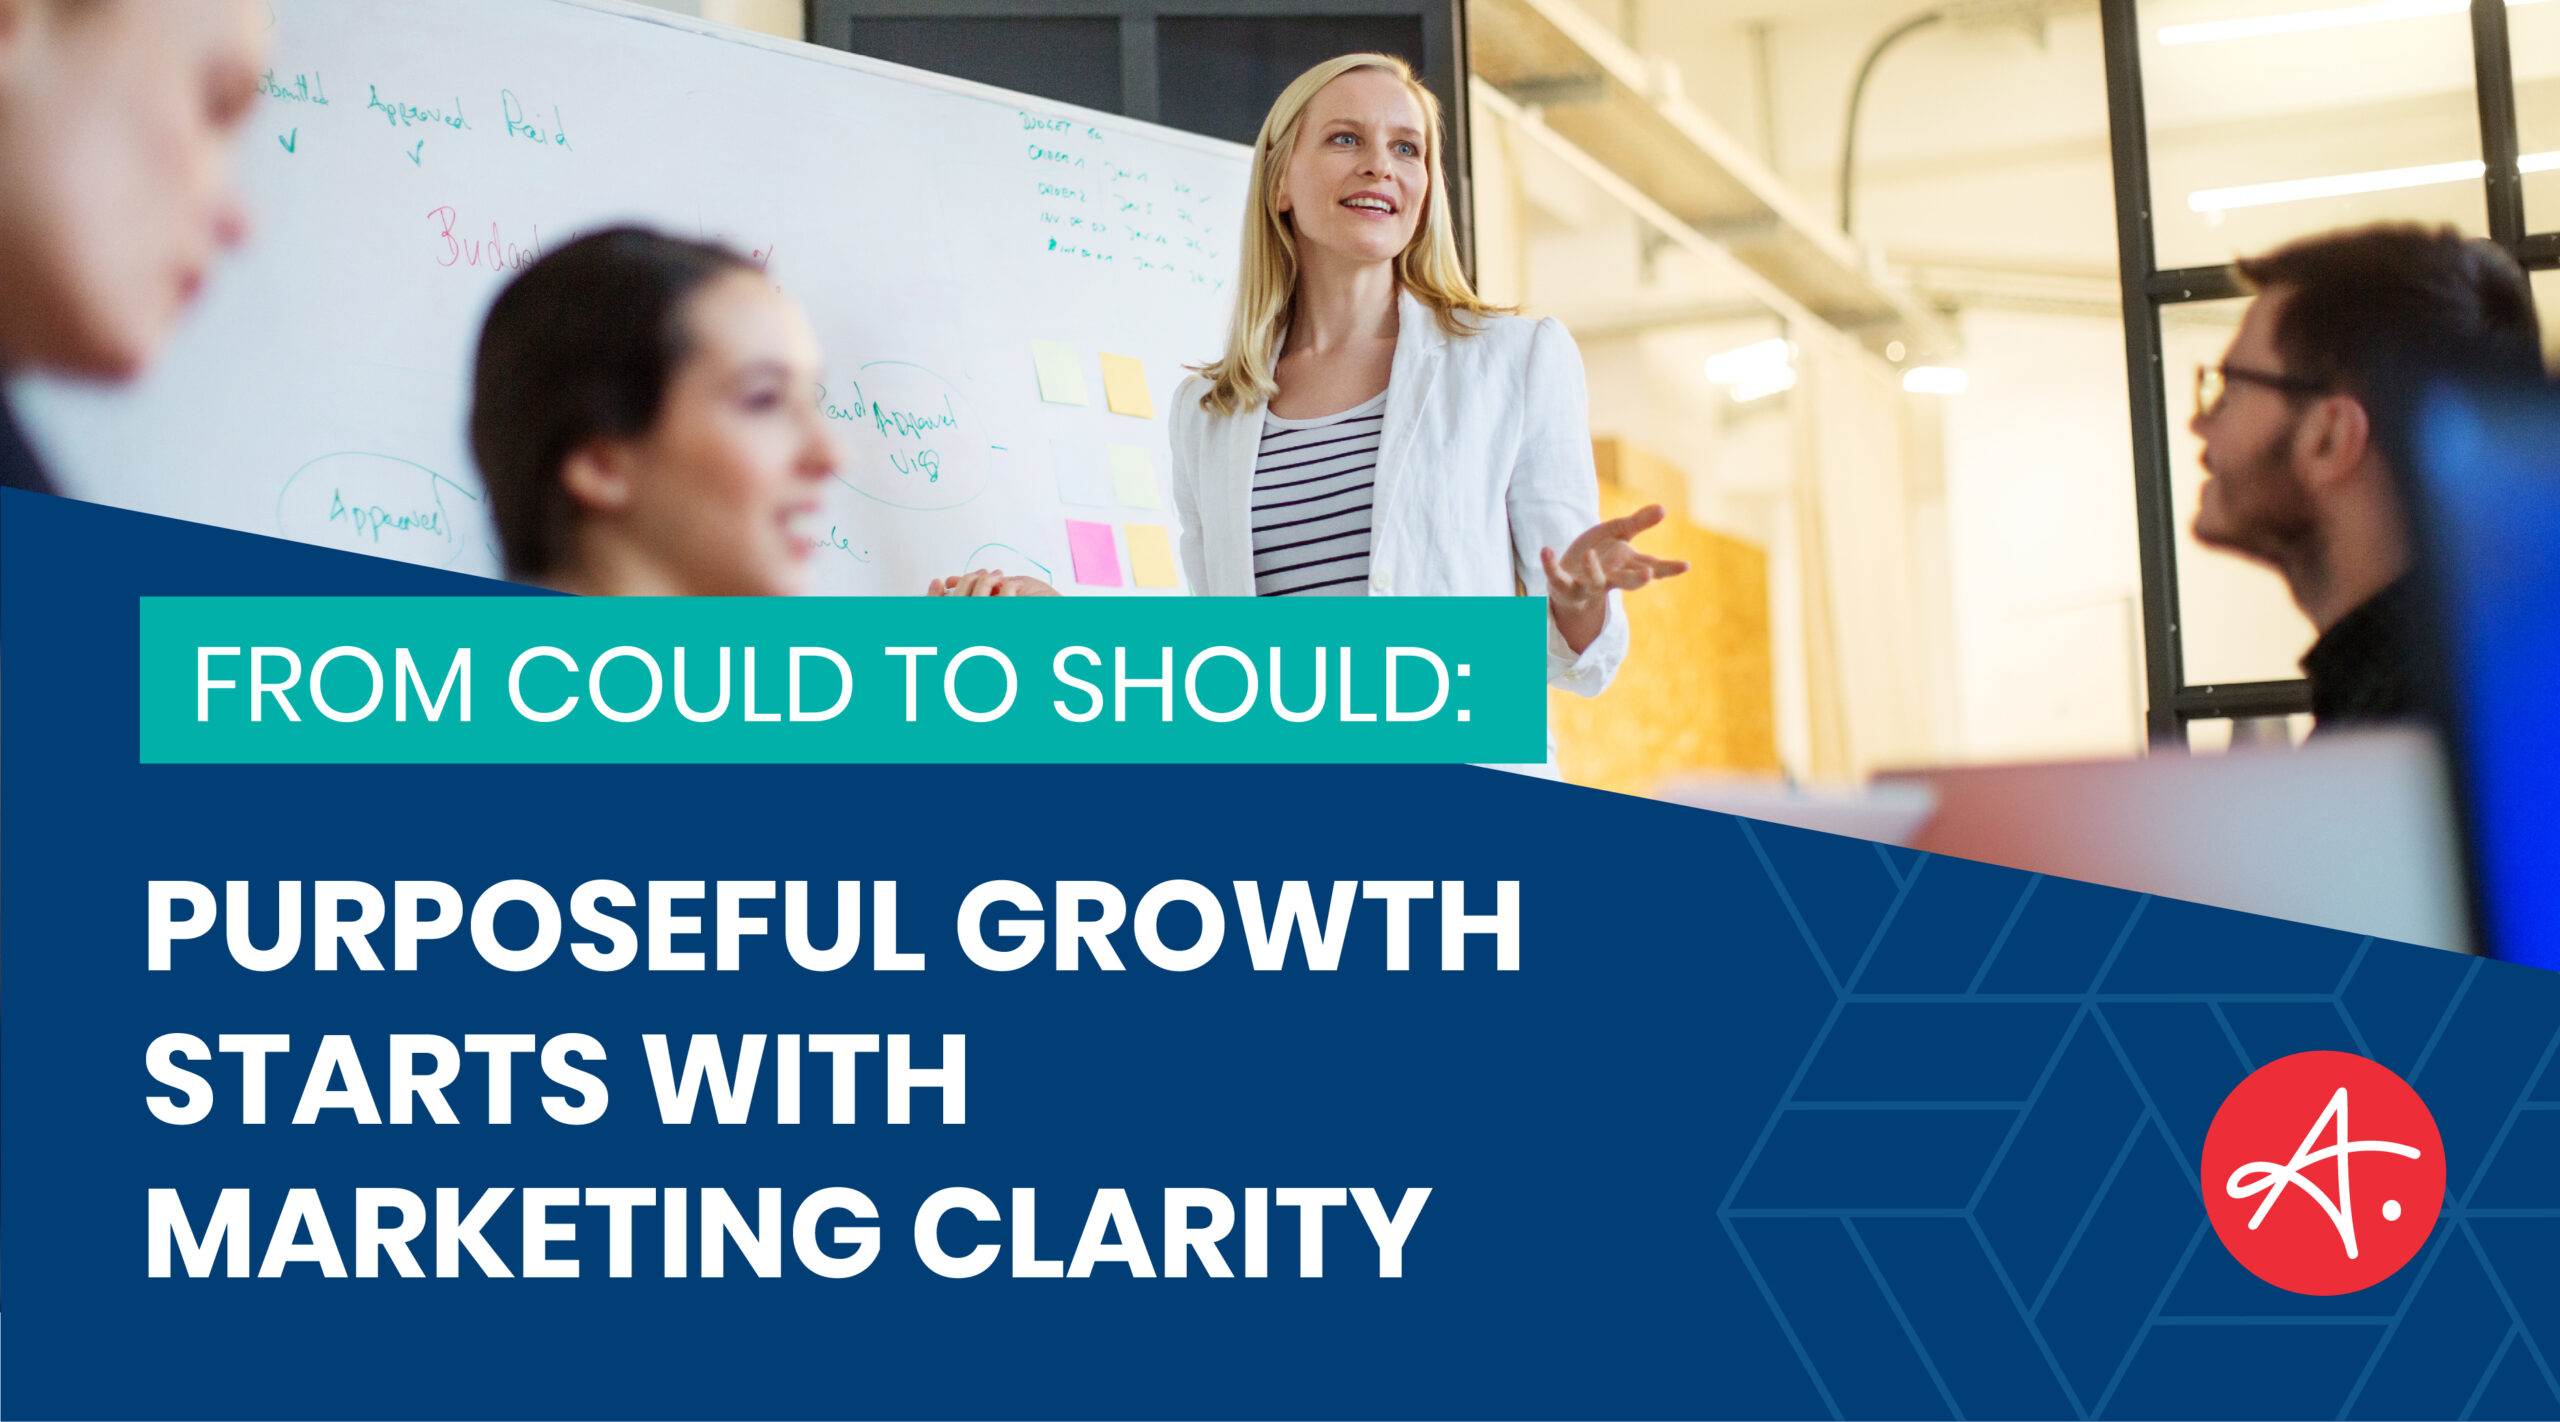 From could to should: Purposeful growth starts with marketing clarity